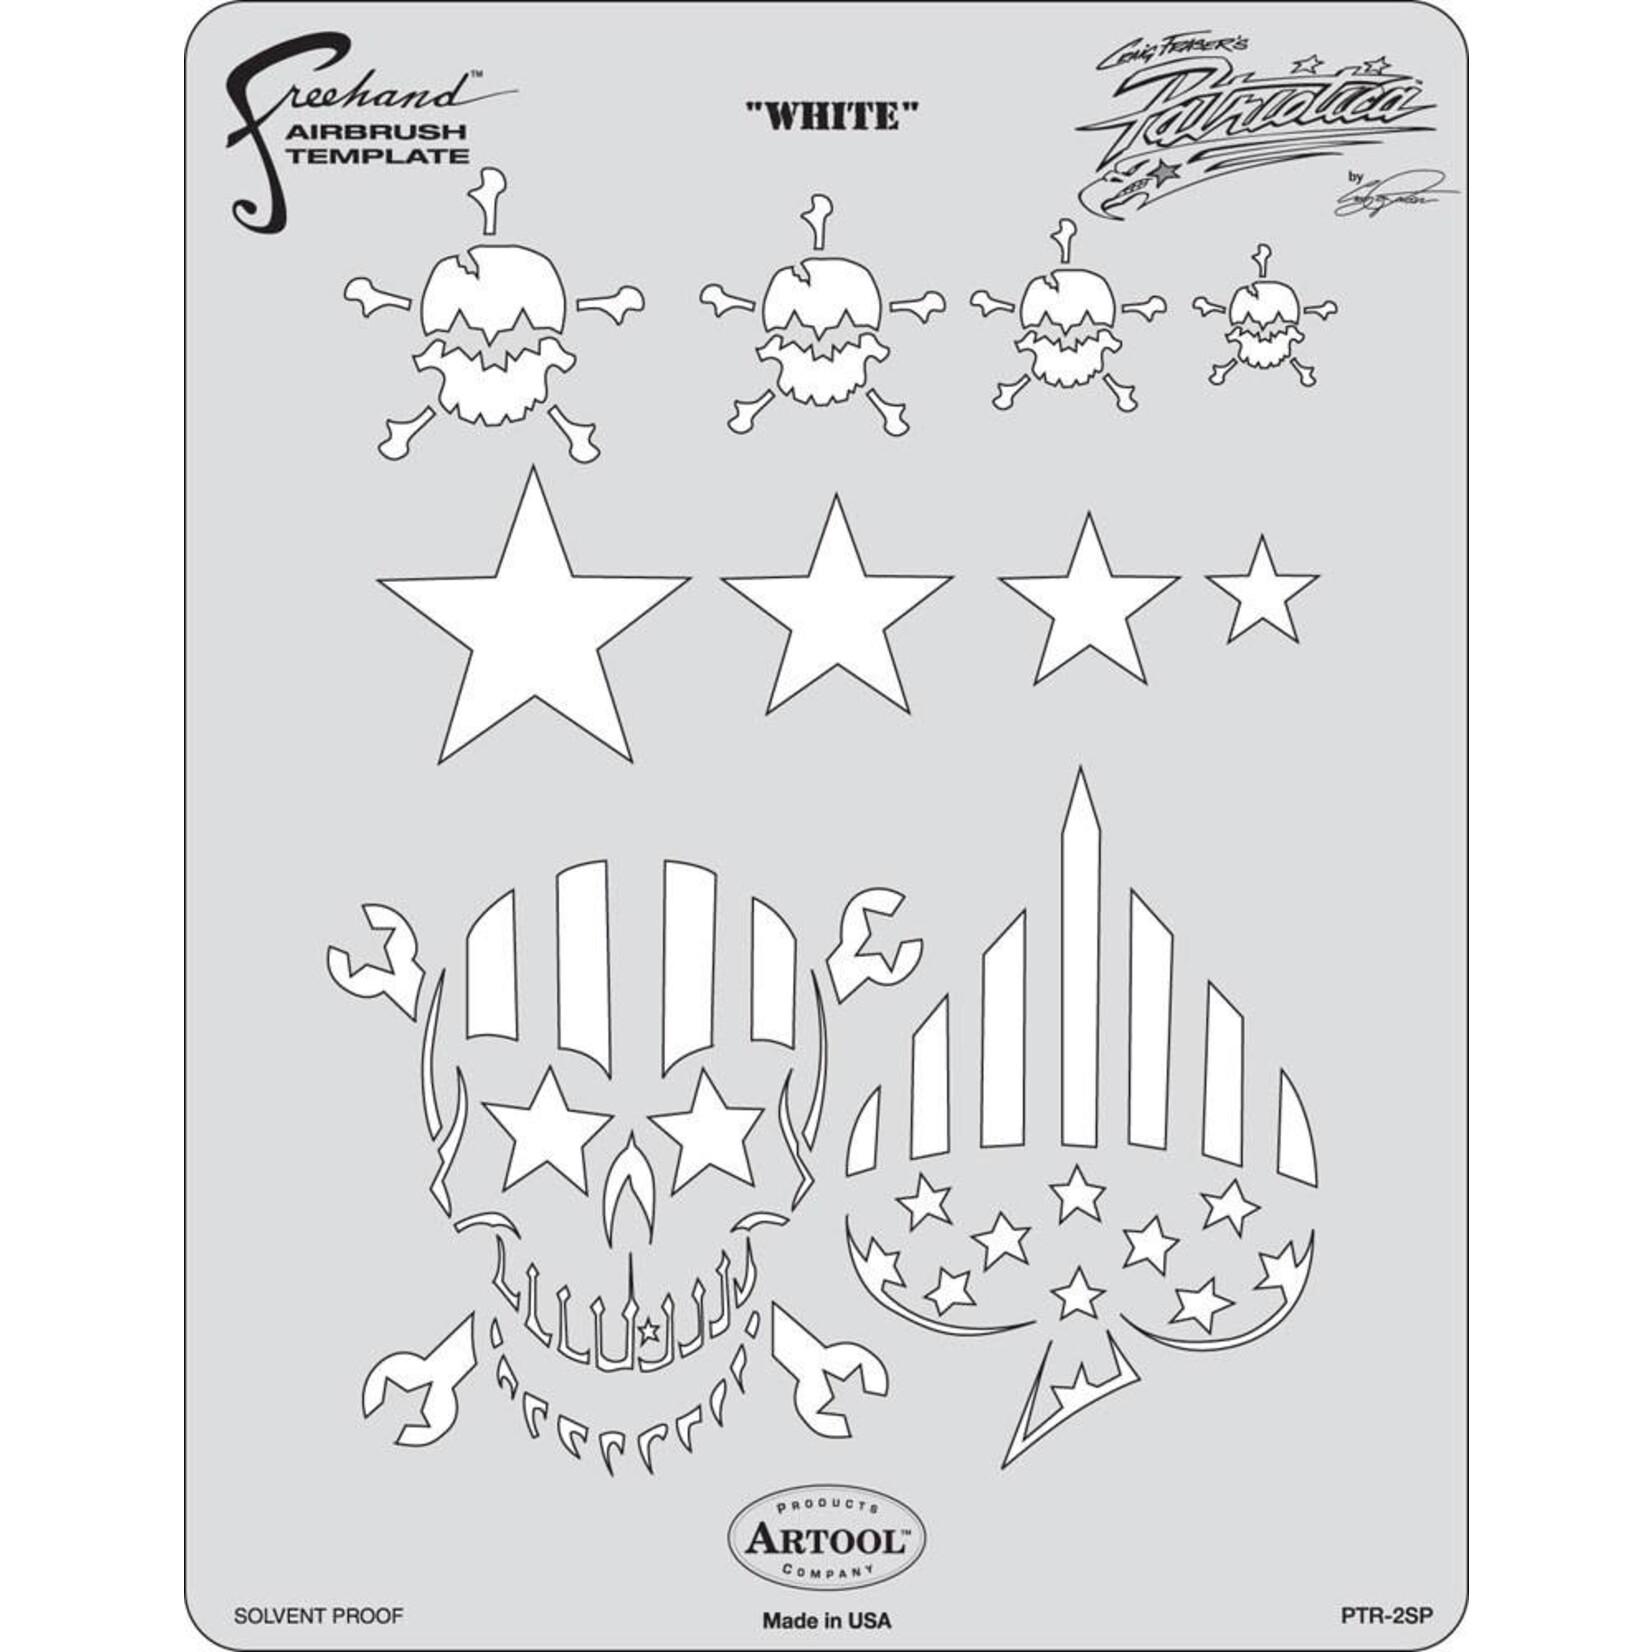 ARTOOLPRODUCTS ARTOOL FREEHAND AIRBRUSH TEMPLATE PTR2 WHITE